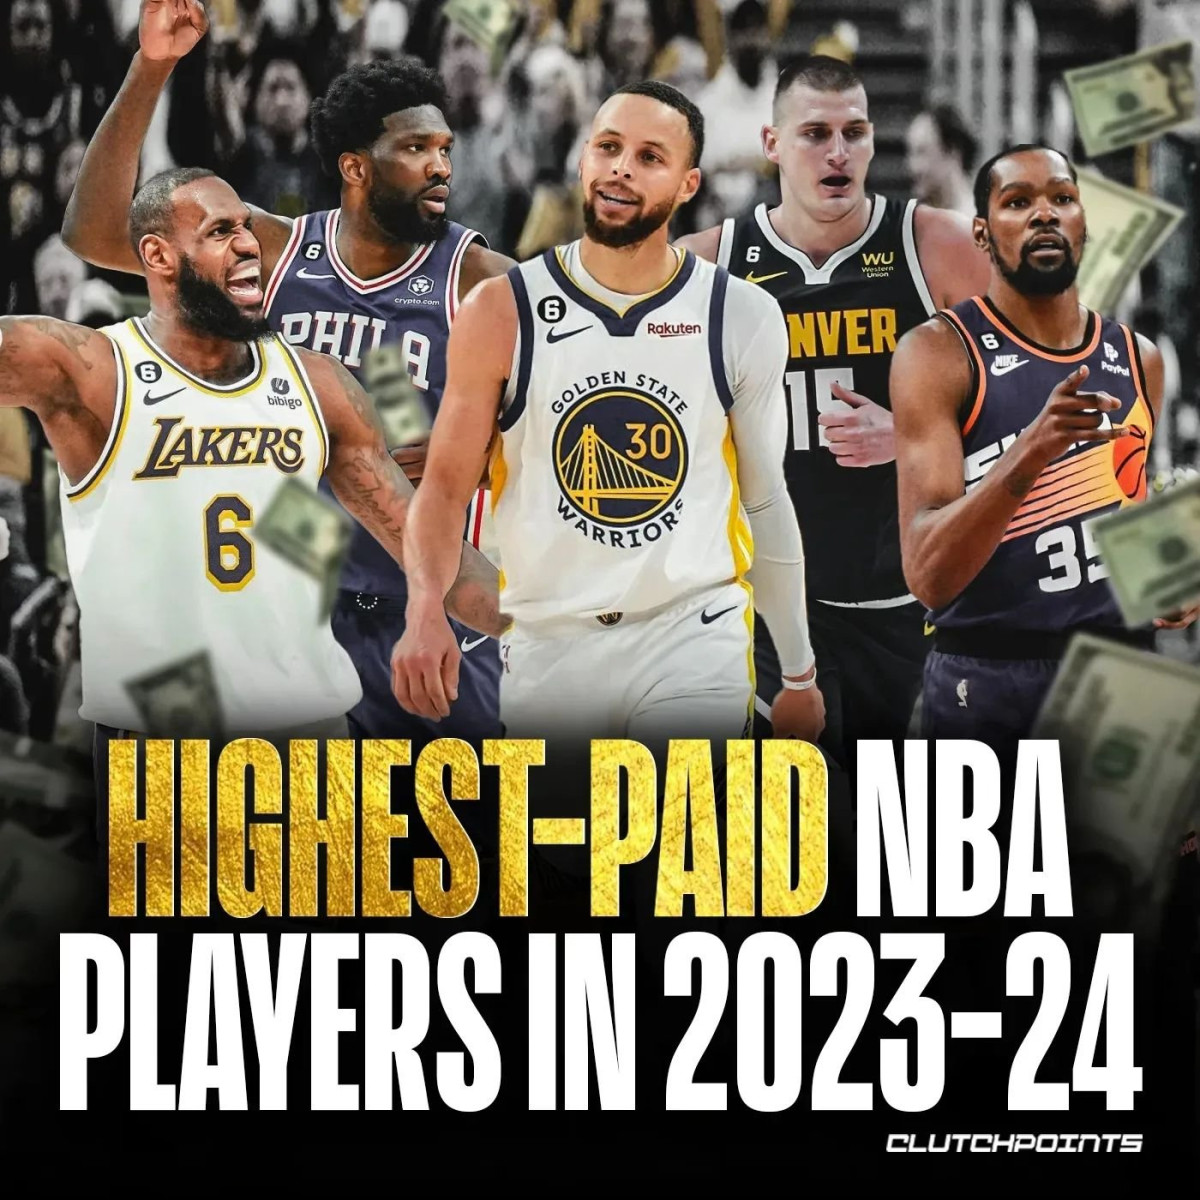 Inspiredlovers Where-Steph-Curry-and-Klay-Thompson-rank-among-highest-paid-NBA-players-in-2023-24-2 Where Steph Curry and Klay Thompson rank among highest-paid NBA players in 2023-24 NBA Sports  Warriors Stephen Curry NBA World NBA News Klay Thompson 